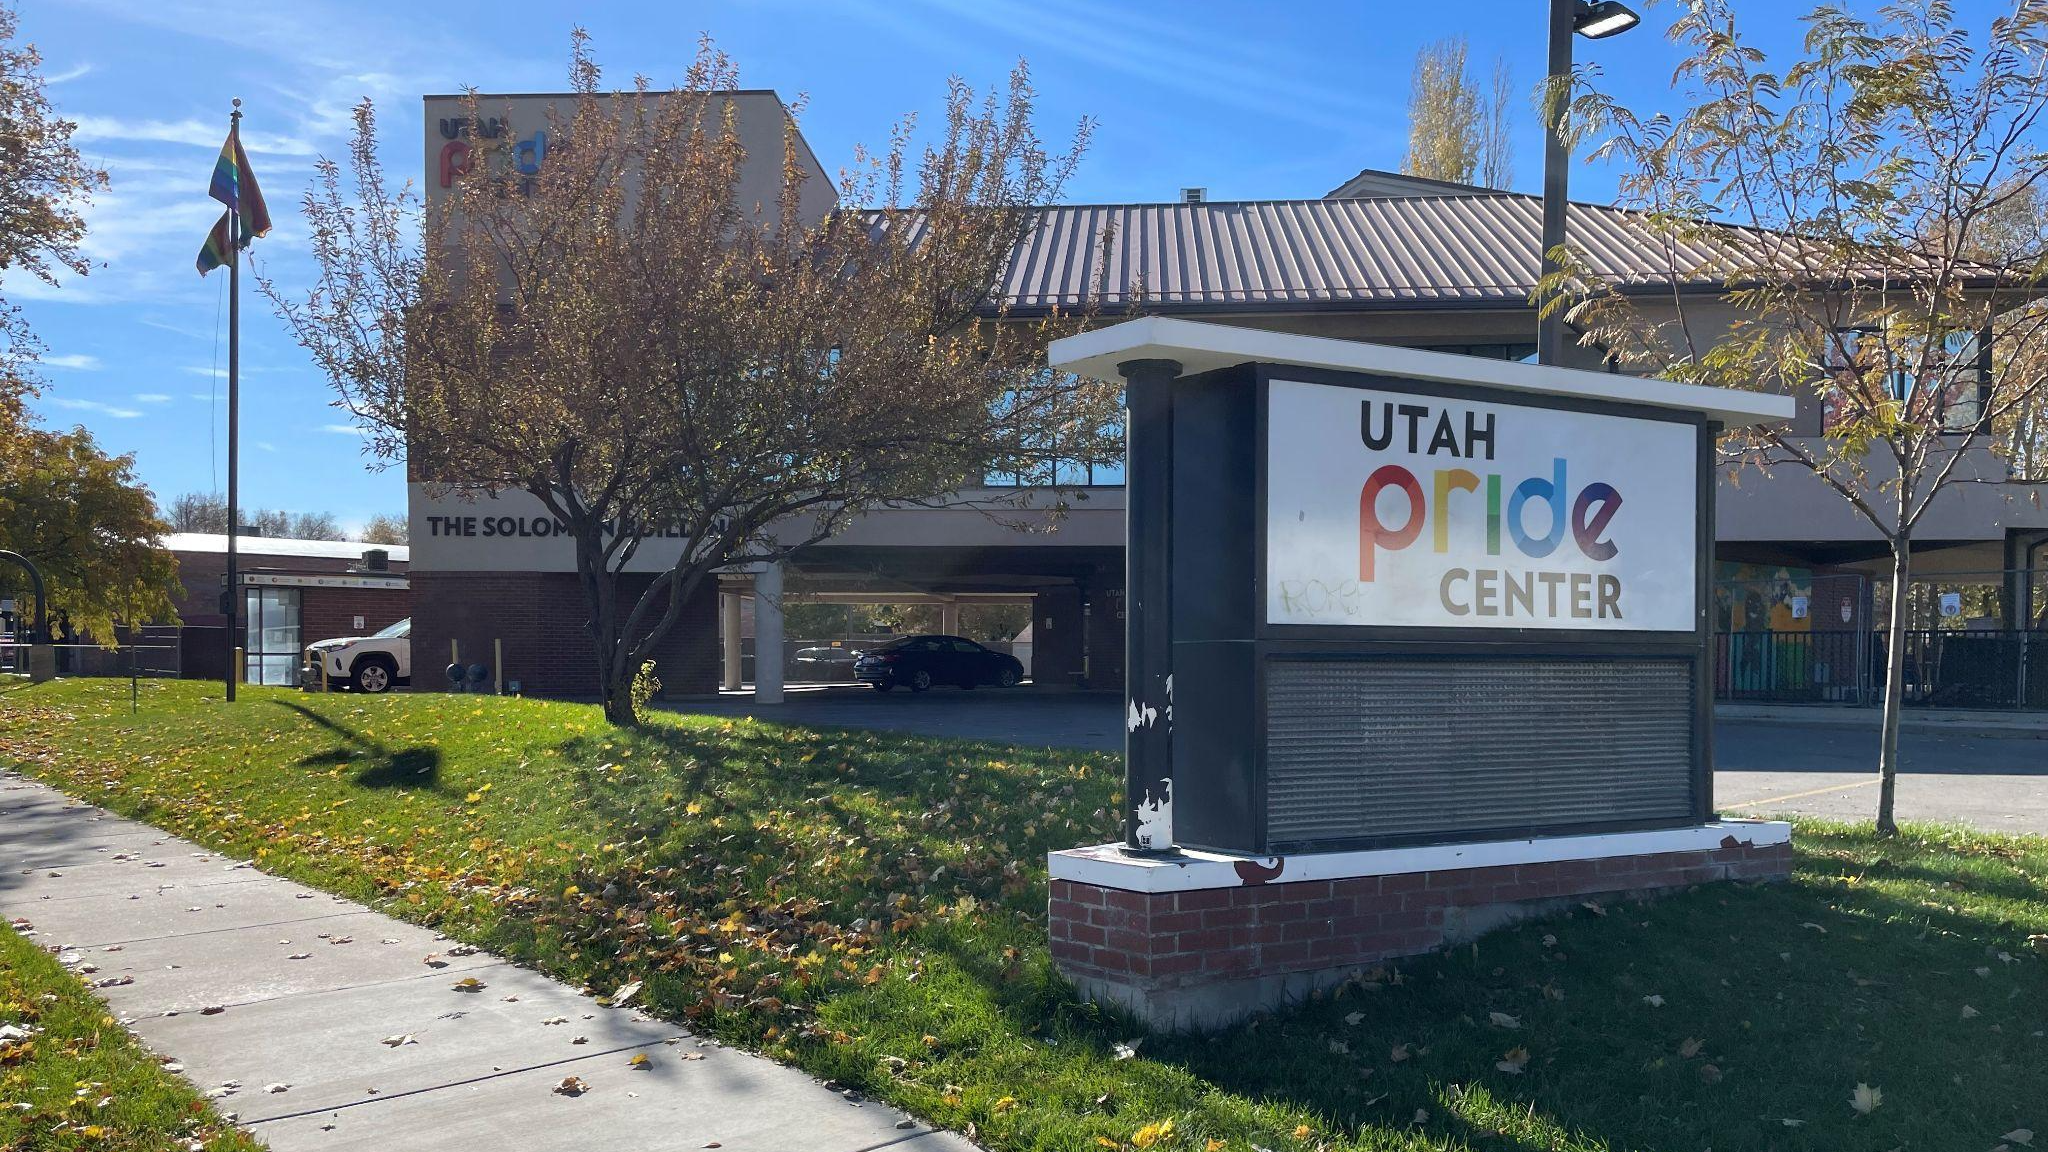 SLCPD is asking for anything with information regarding the vandalism at the Utah Pride Center to c...